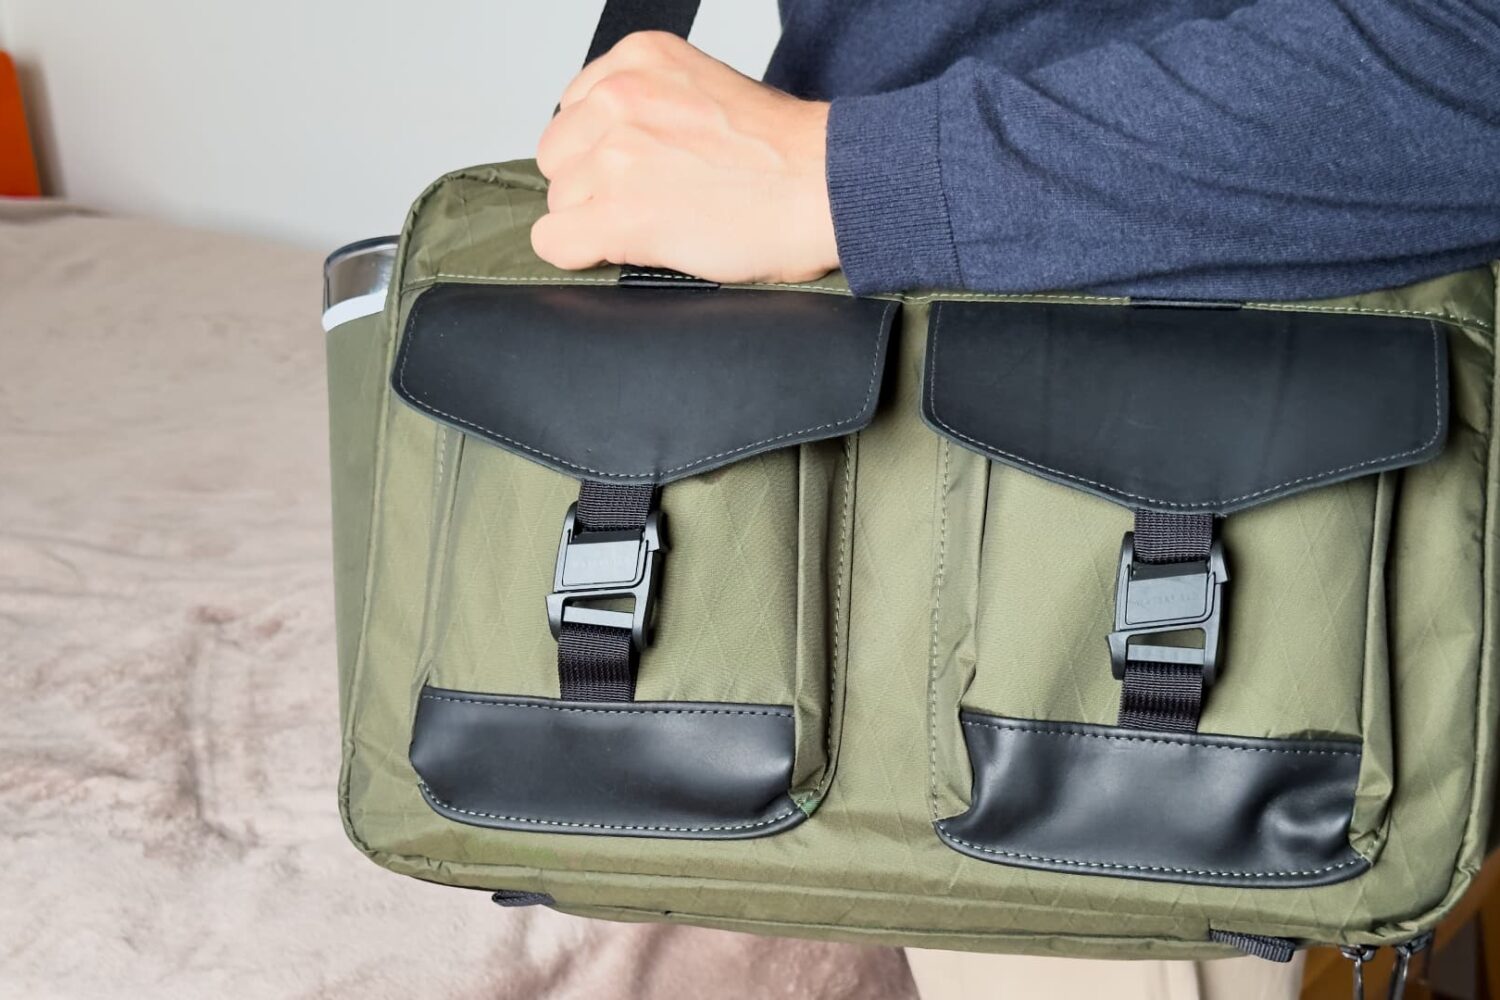 Man carrying Waterfield's X-Air Duffel travel bag on shoulder, showcasing the front pockets